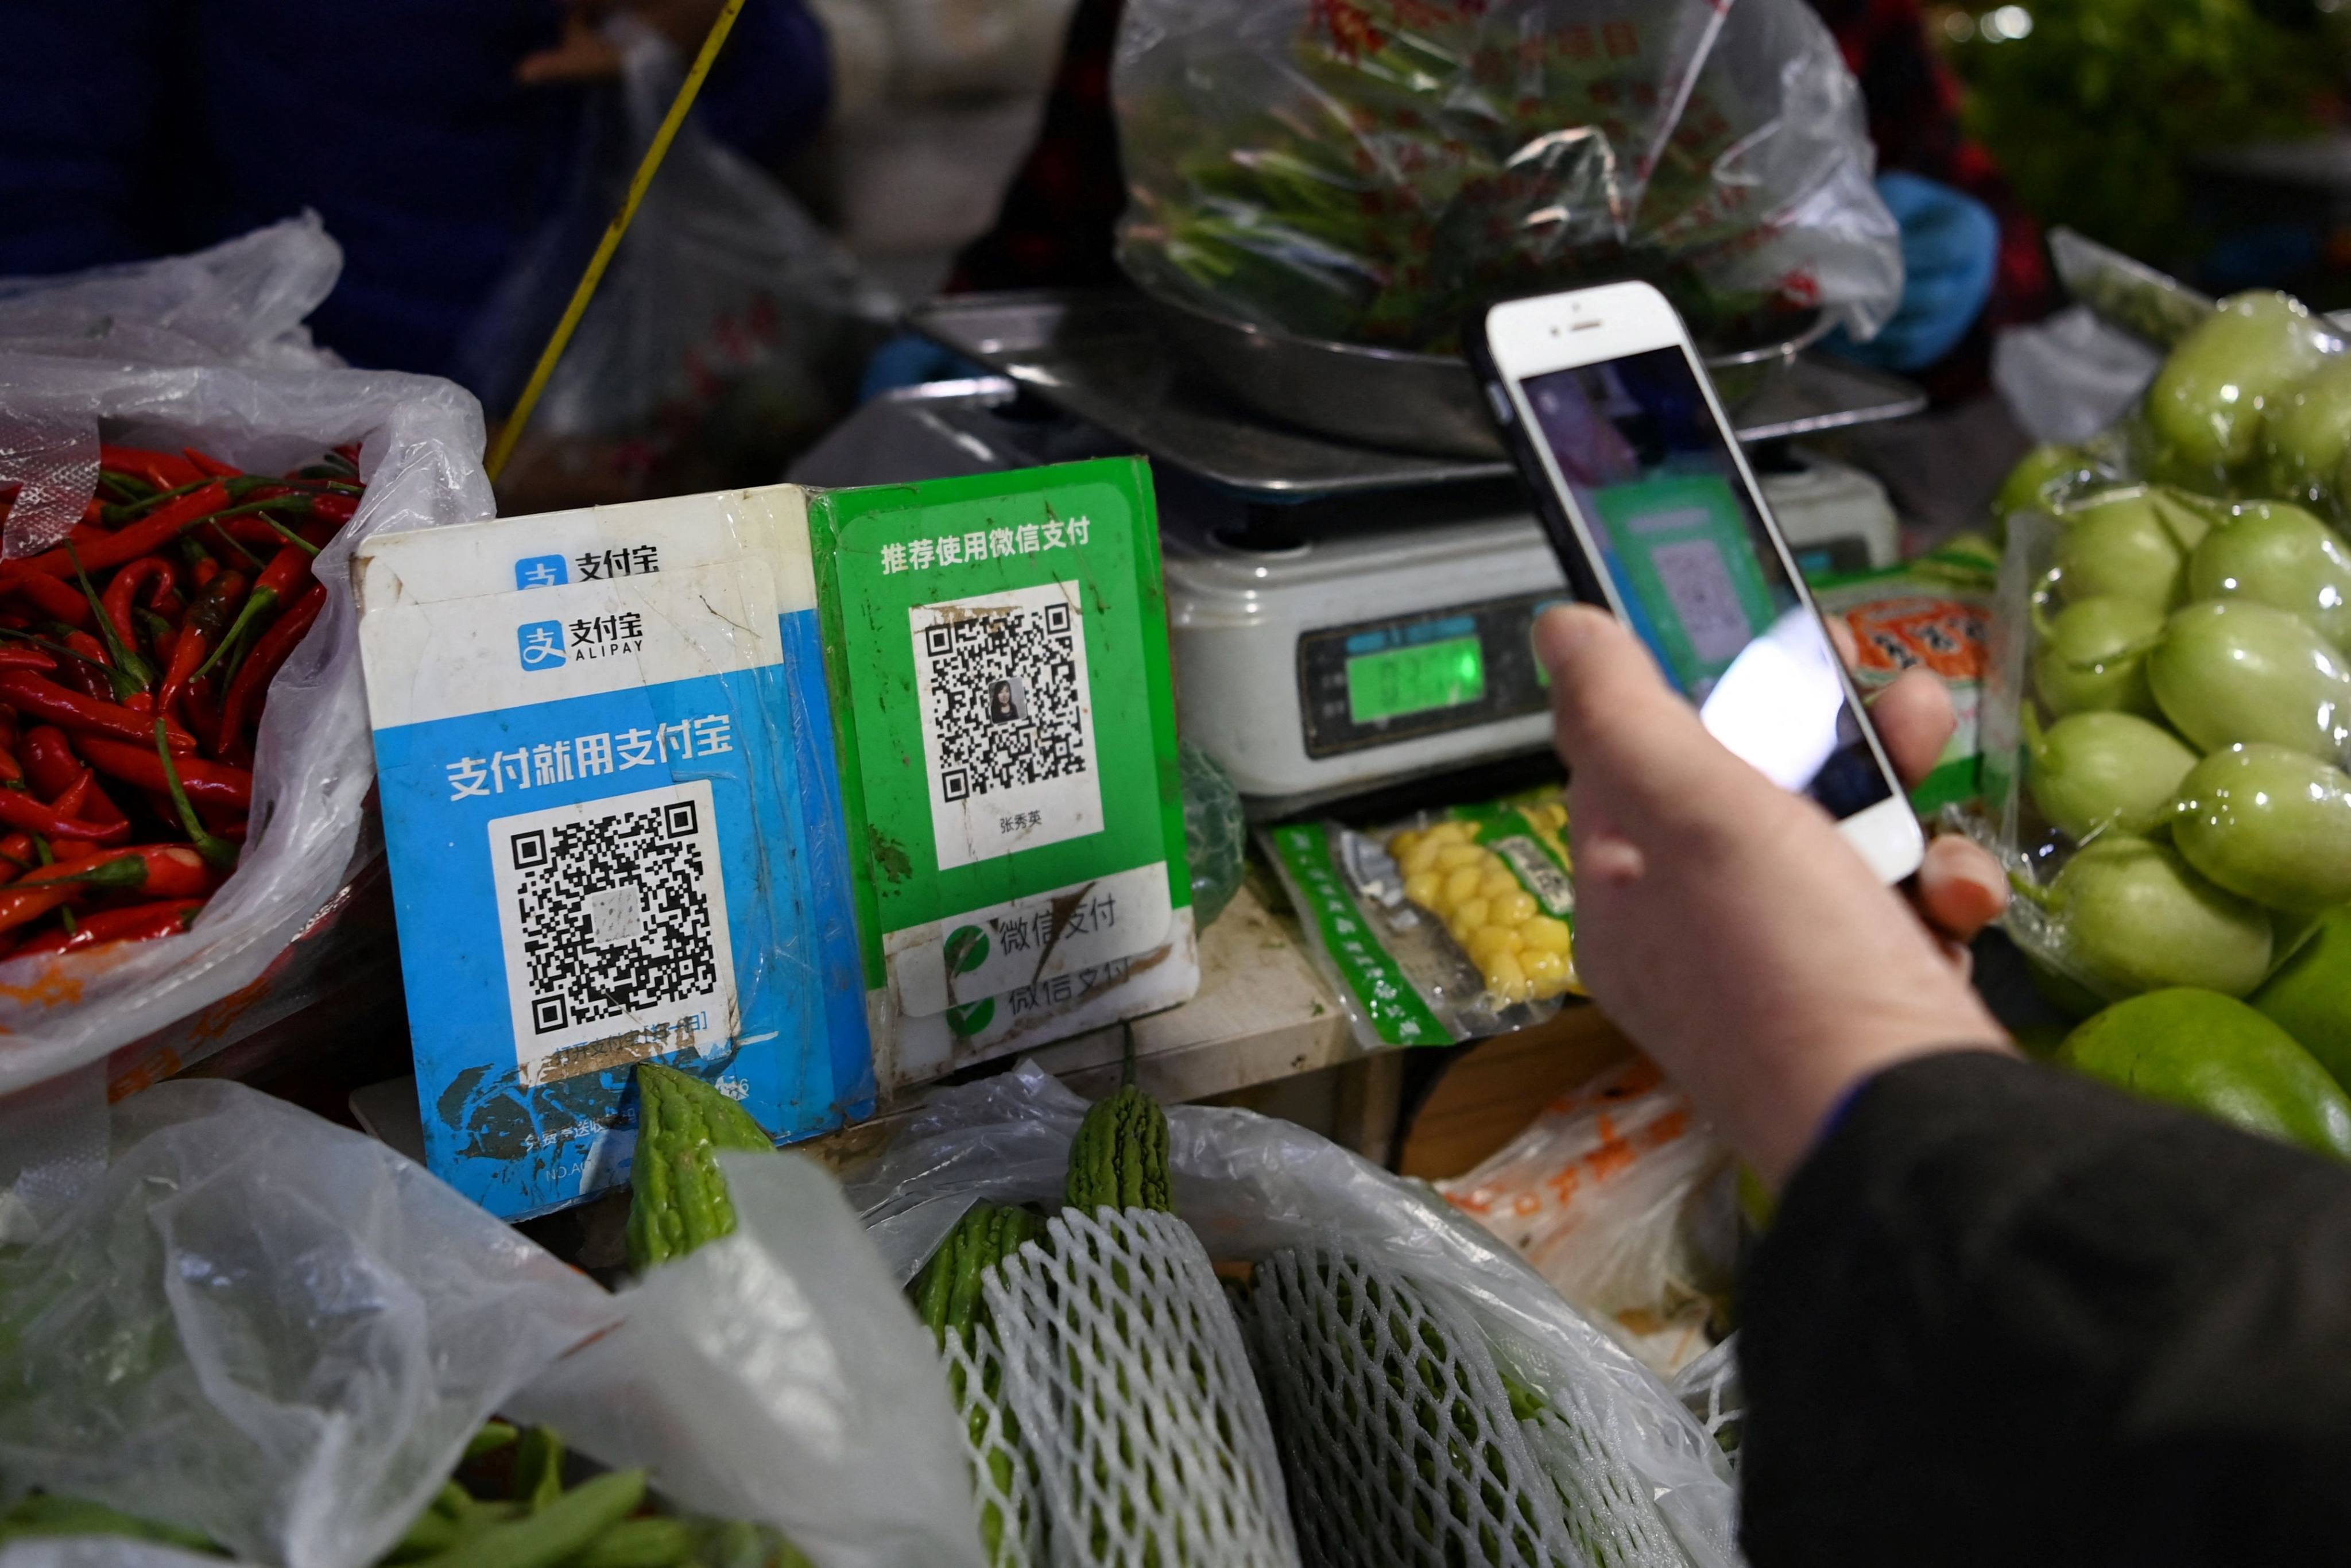 Mobile payments are used for everything from groceries to holidays. Photo: AFP